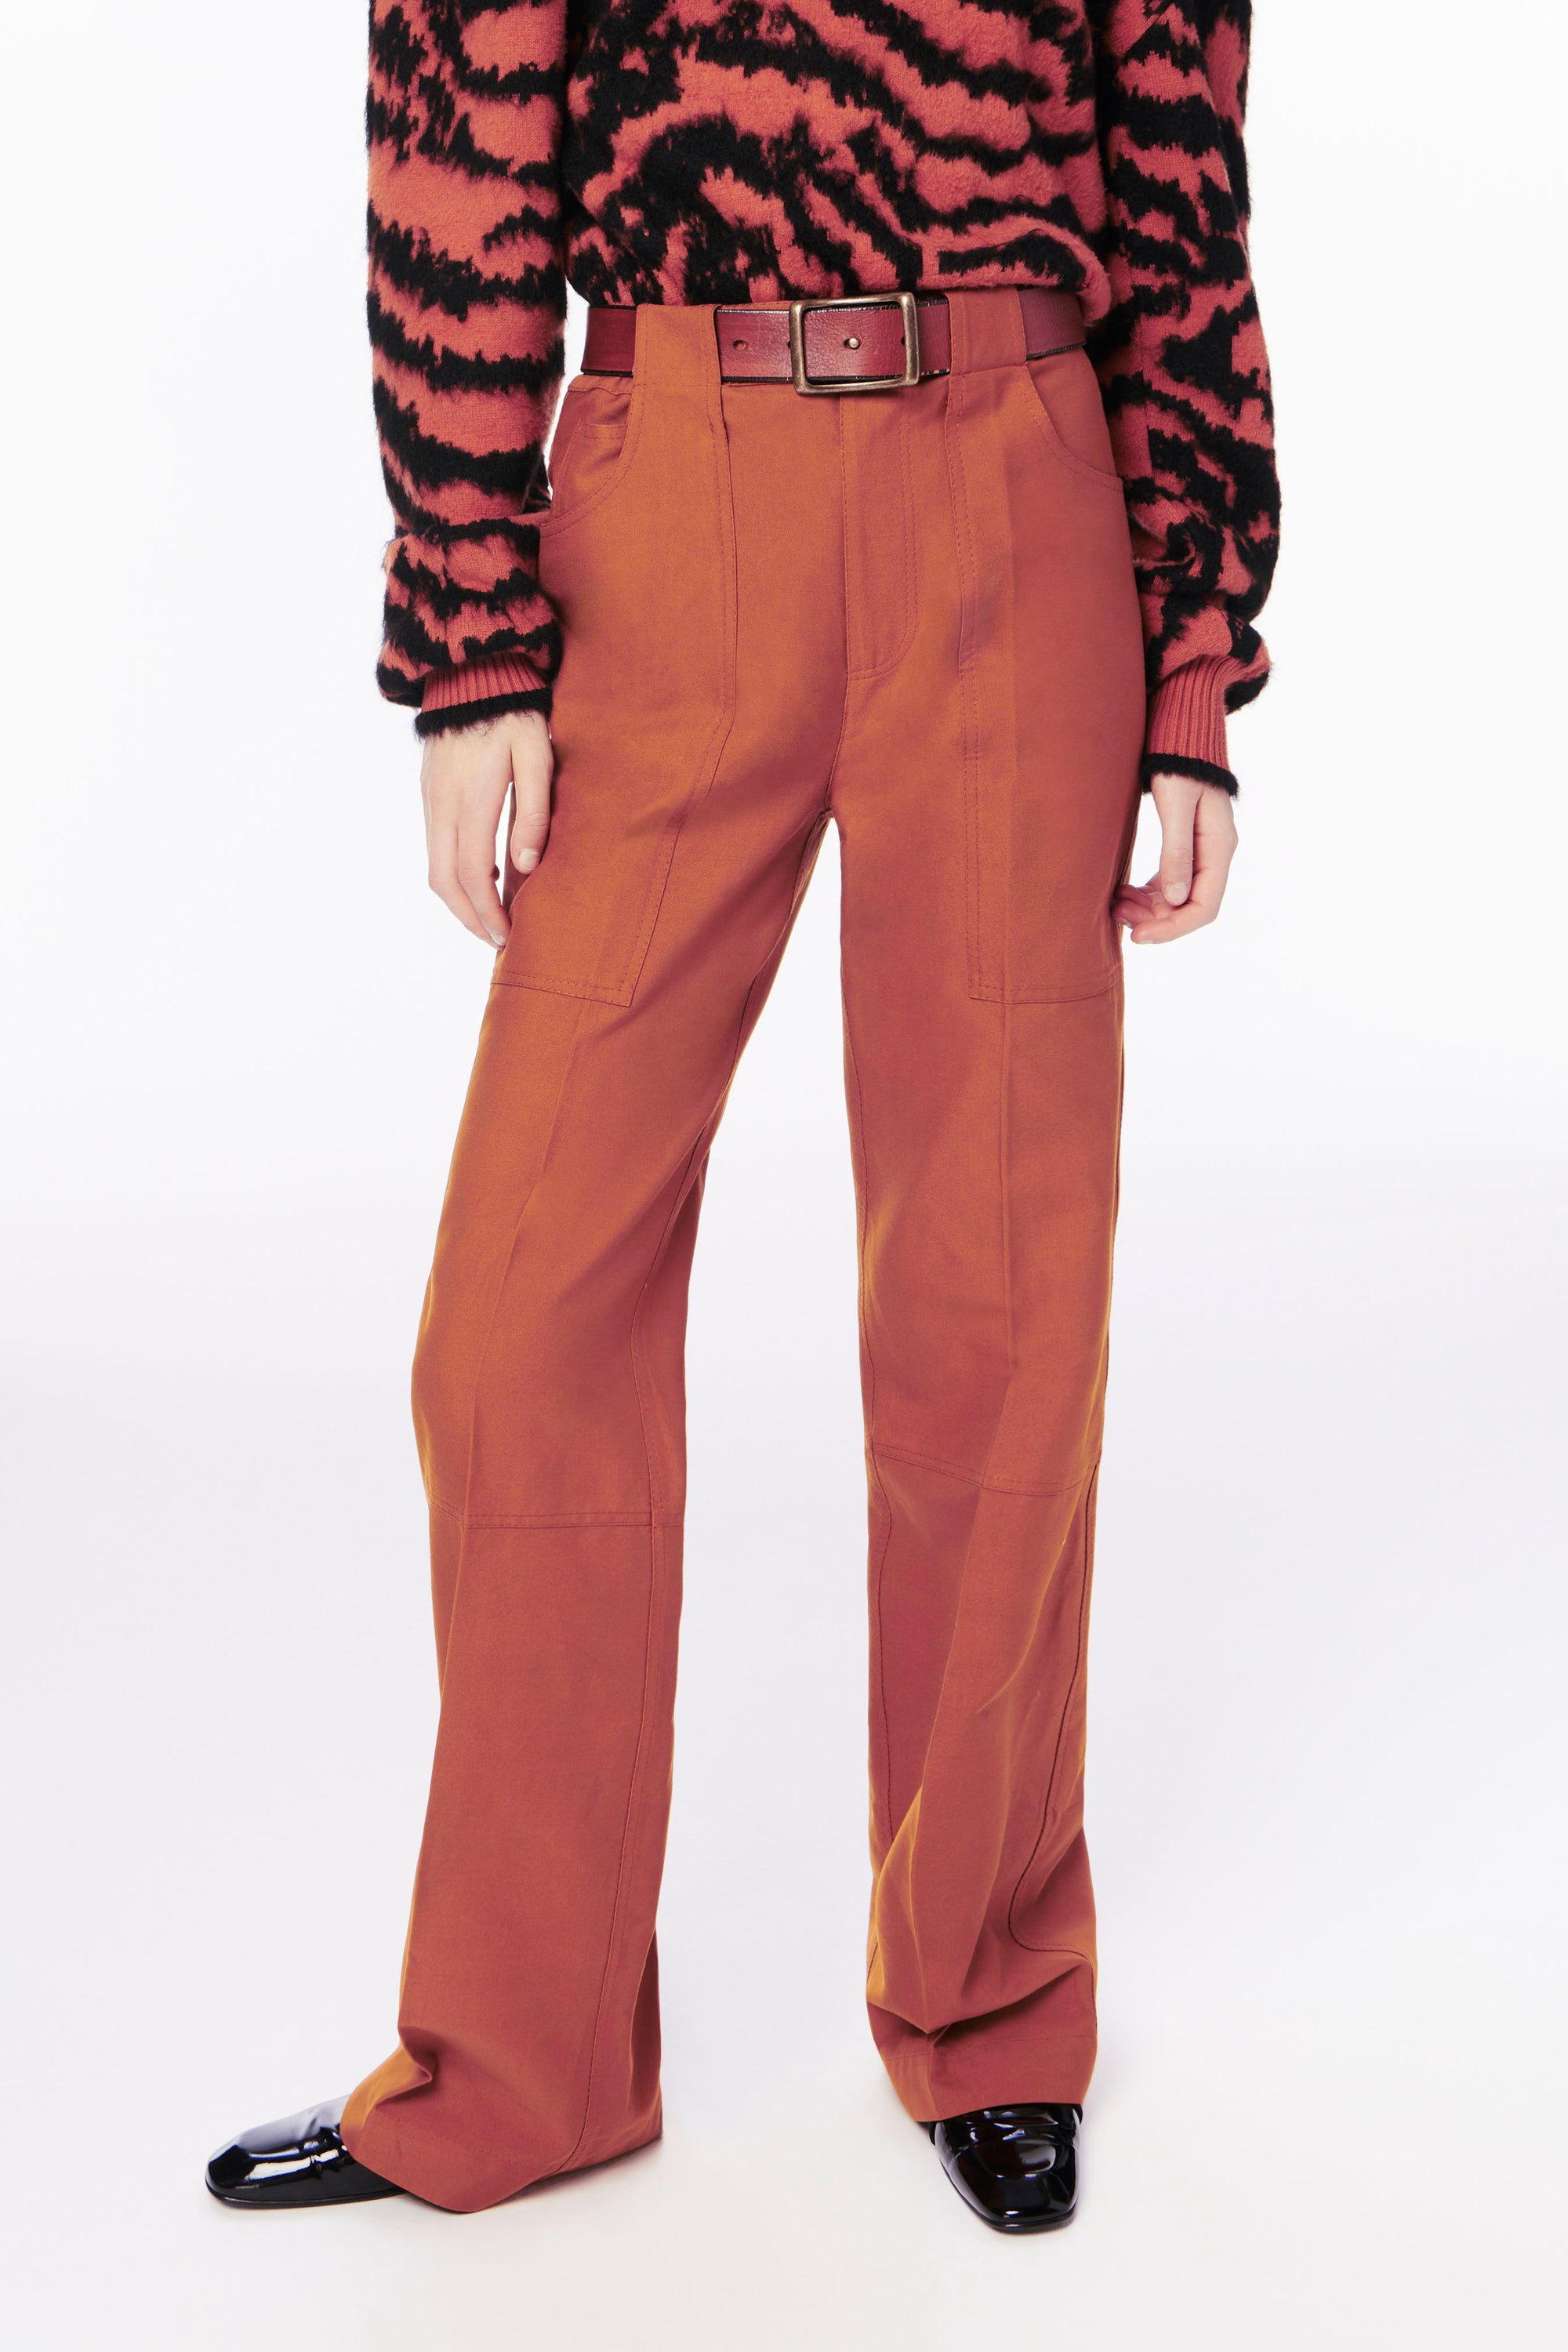 Victoria Beckham Utility Detail Relaxed Trouser in Tobacco